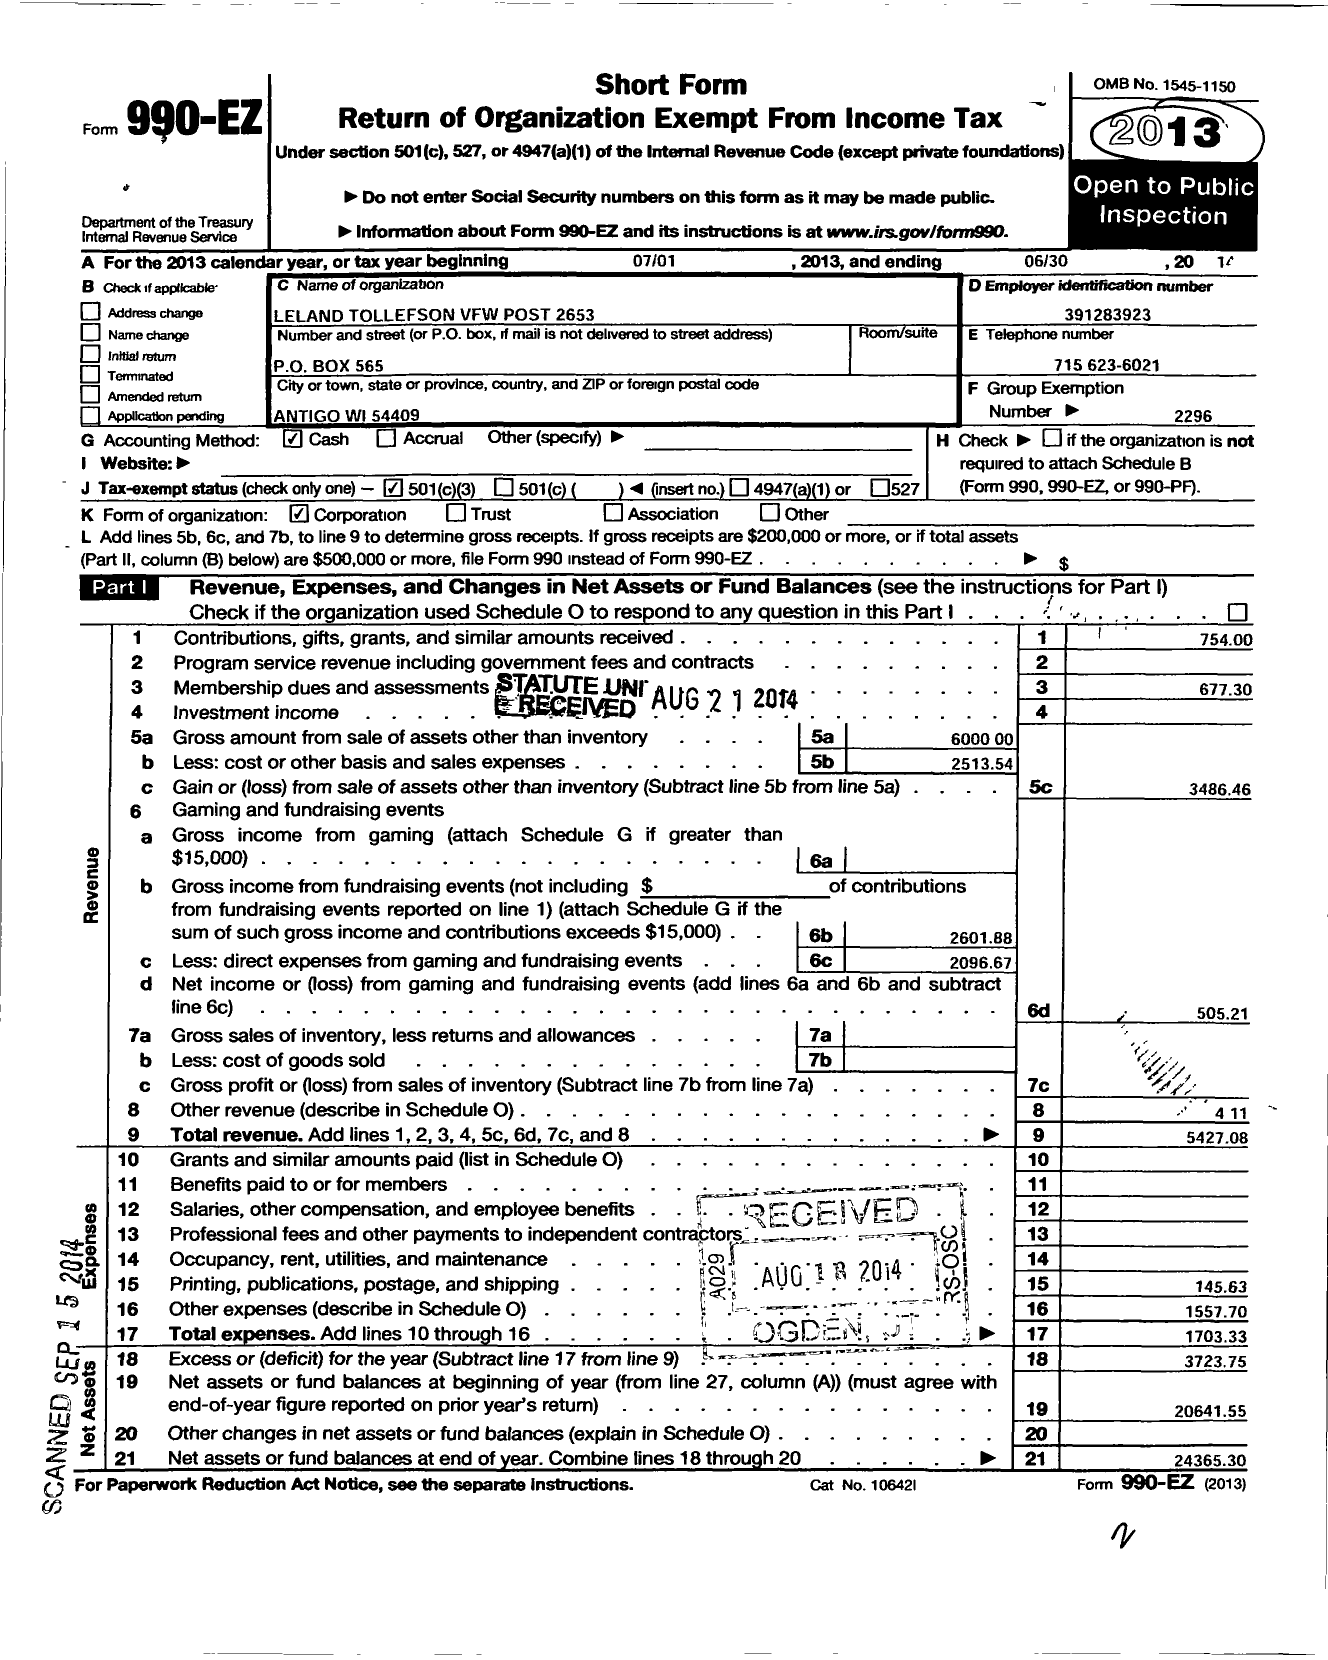 Image of first page of 2013 Form 990EZ for VFW Wi - 2653 Post Leland Tollefson